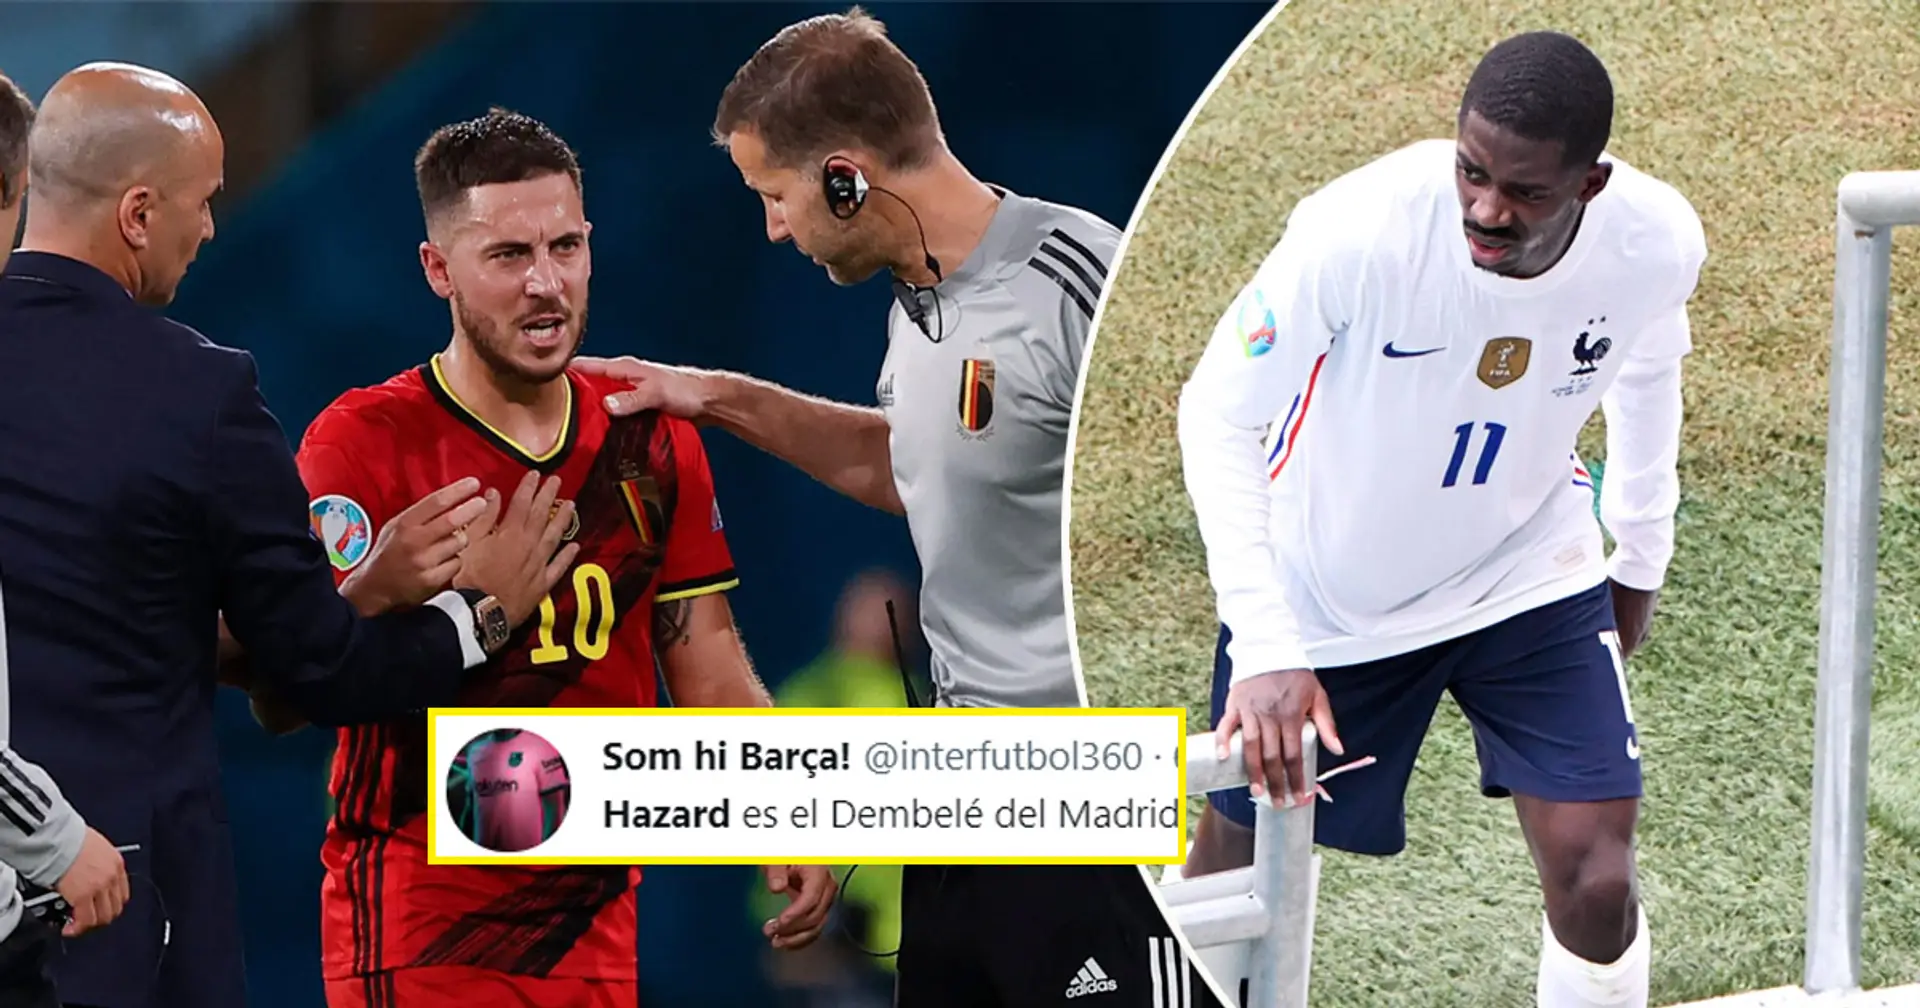 'He's Dembele of Madrid': Barca fans react as Eden Hazard suffers another injury